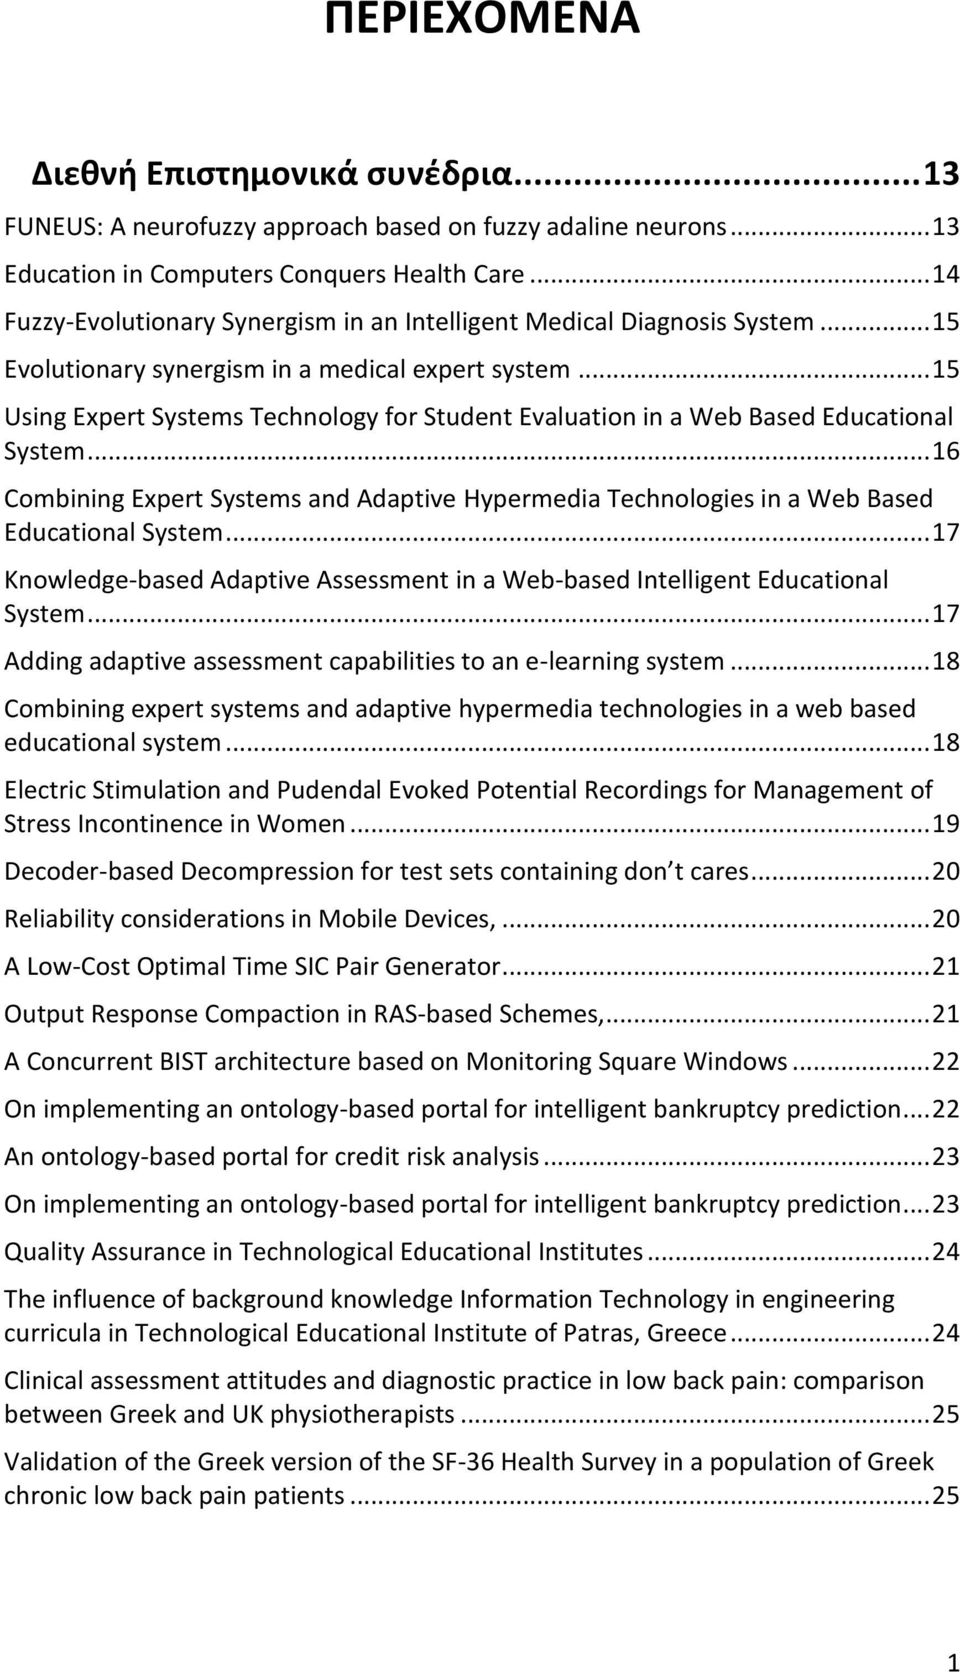 .. 15 Using Expert Systems Technology for Student Evaluation in a Web Based Educational System... 16 Combining Expert Systems and Adaptive Hypermedia Technologies in a Web Based Educational System.